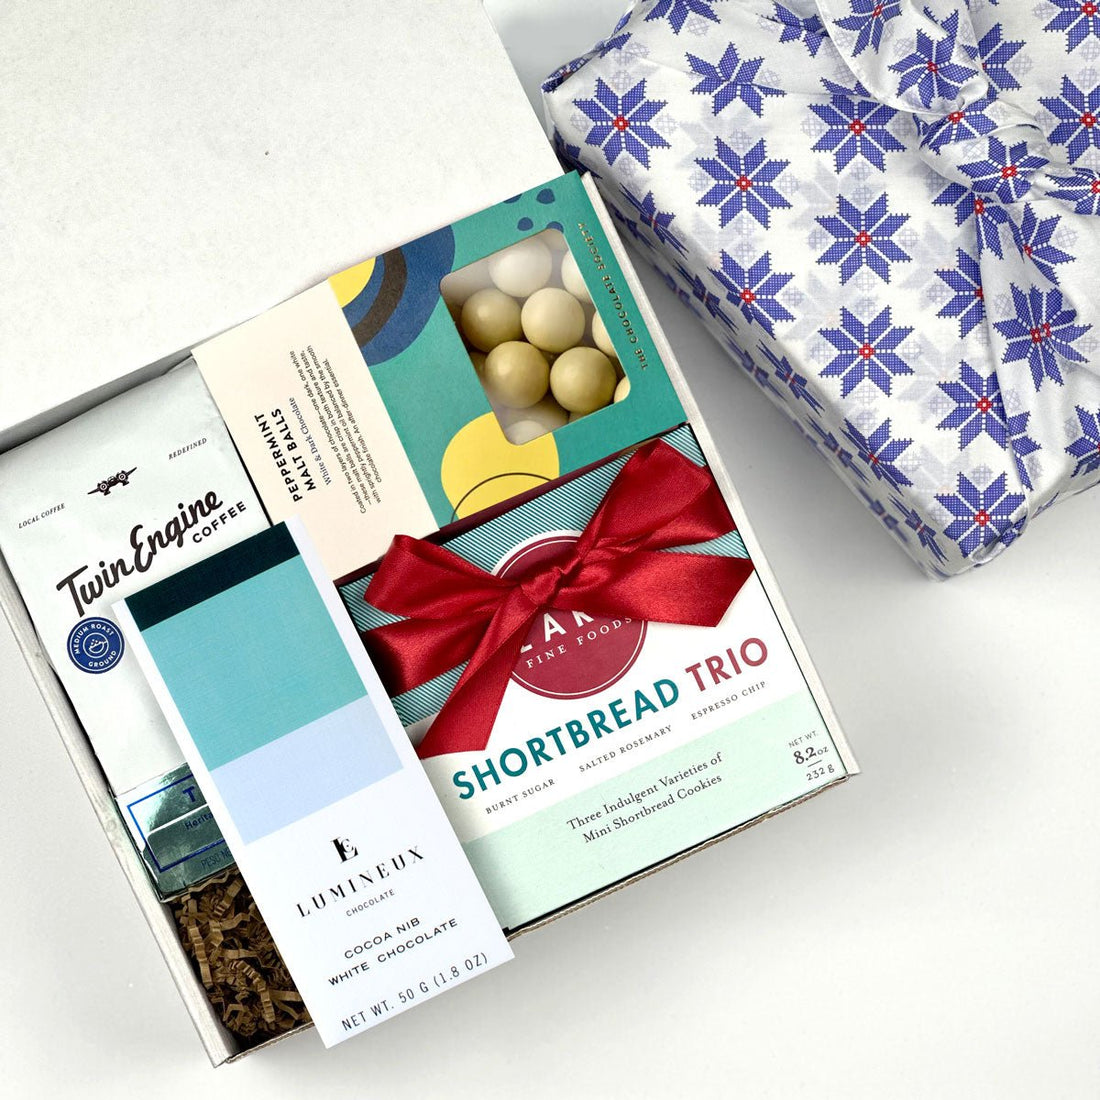 kadoo coffee and chocolate curated holiday gift box. Filled with shortbread cookies, chocolate, premium coffee and more. Wrapped in reusable Furoshiki fabric.